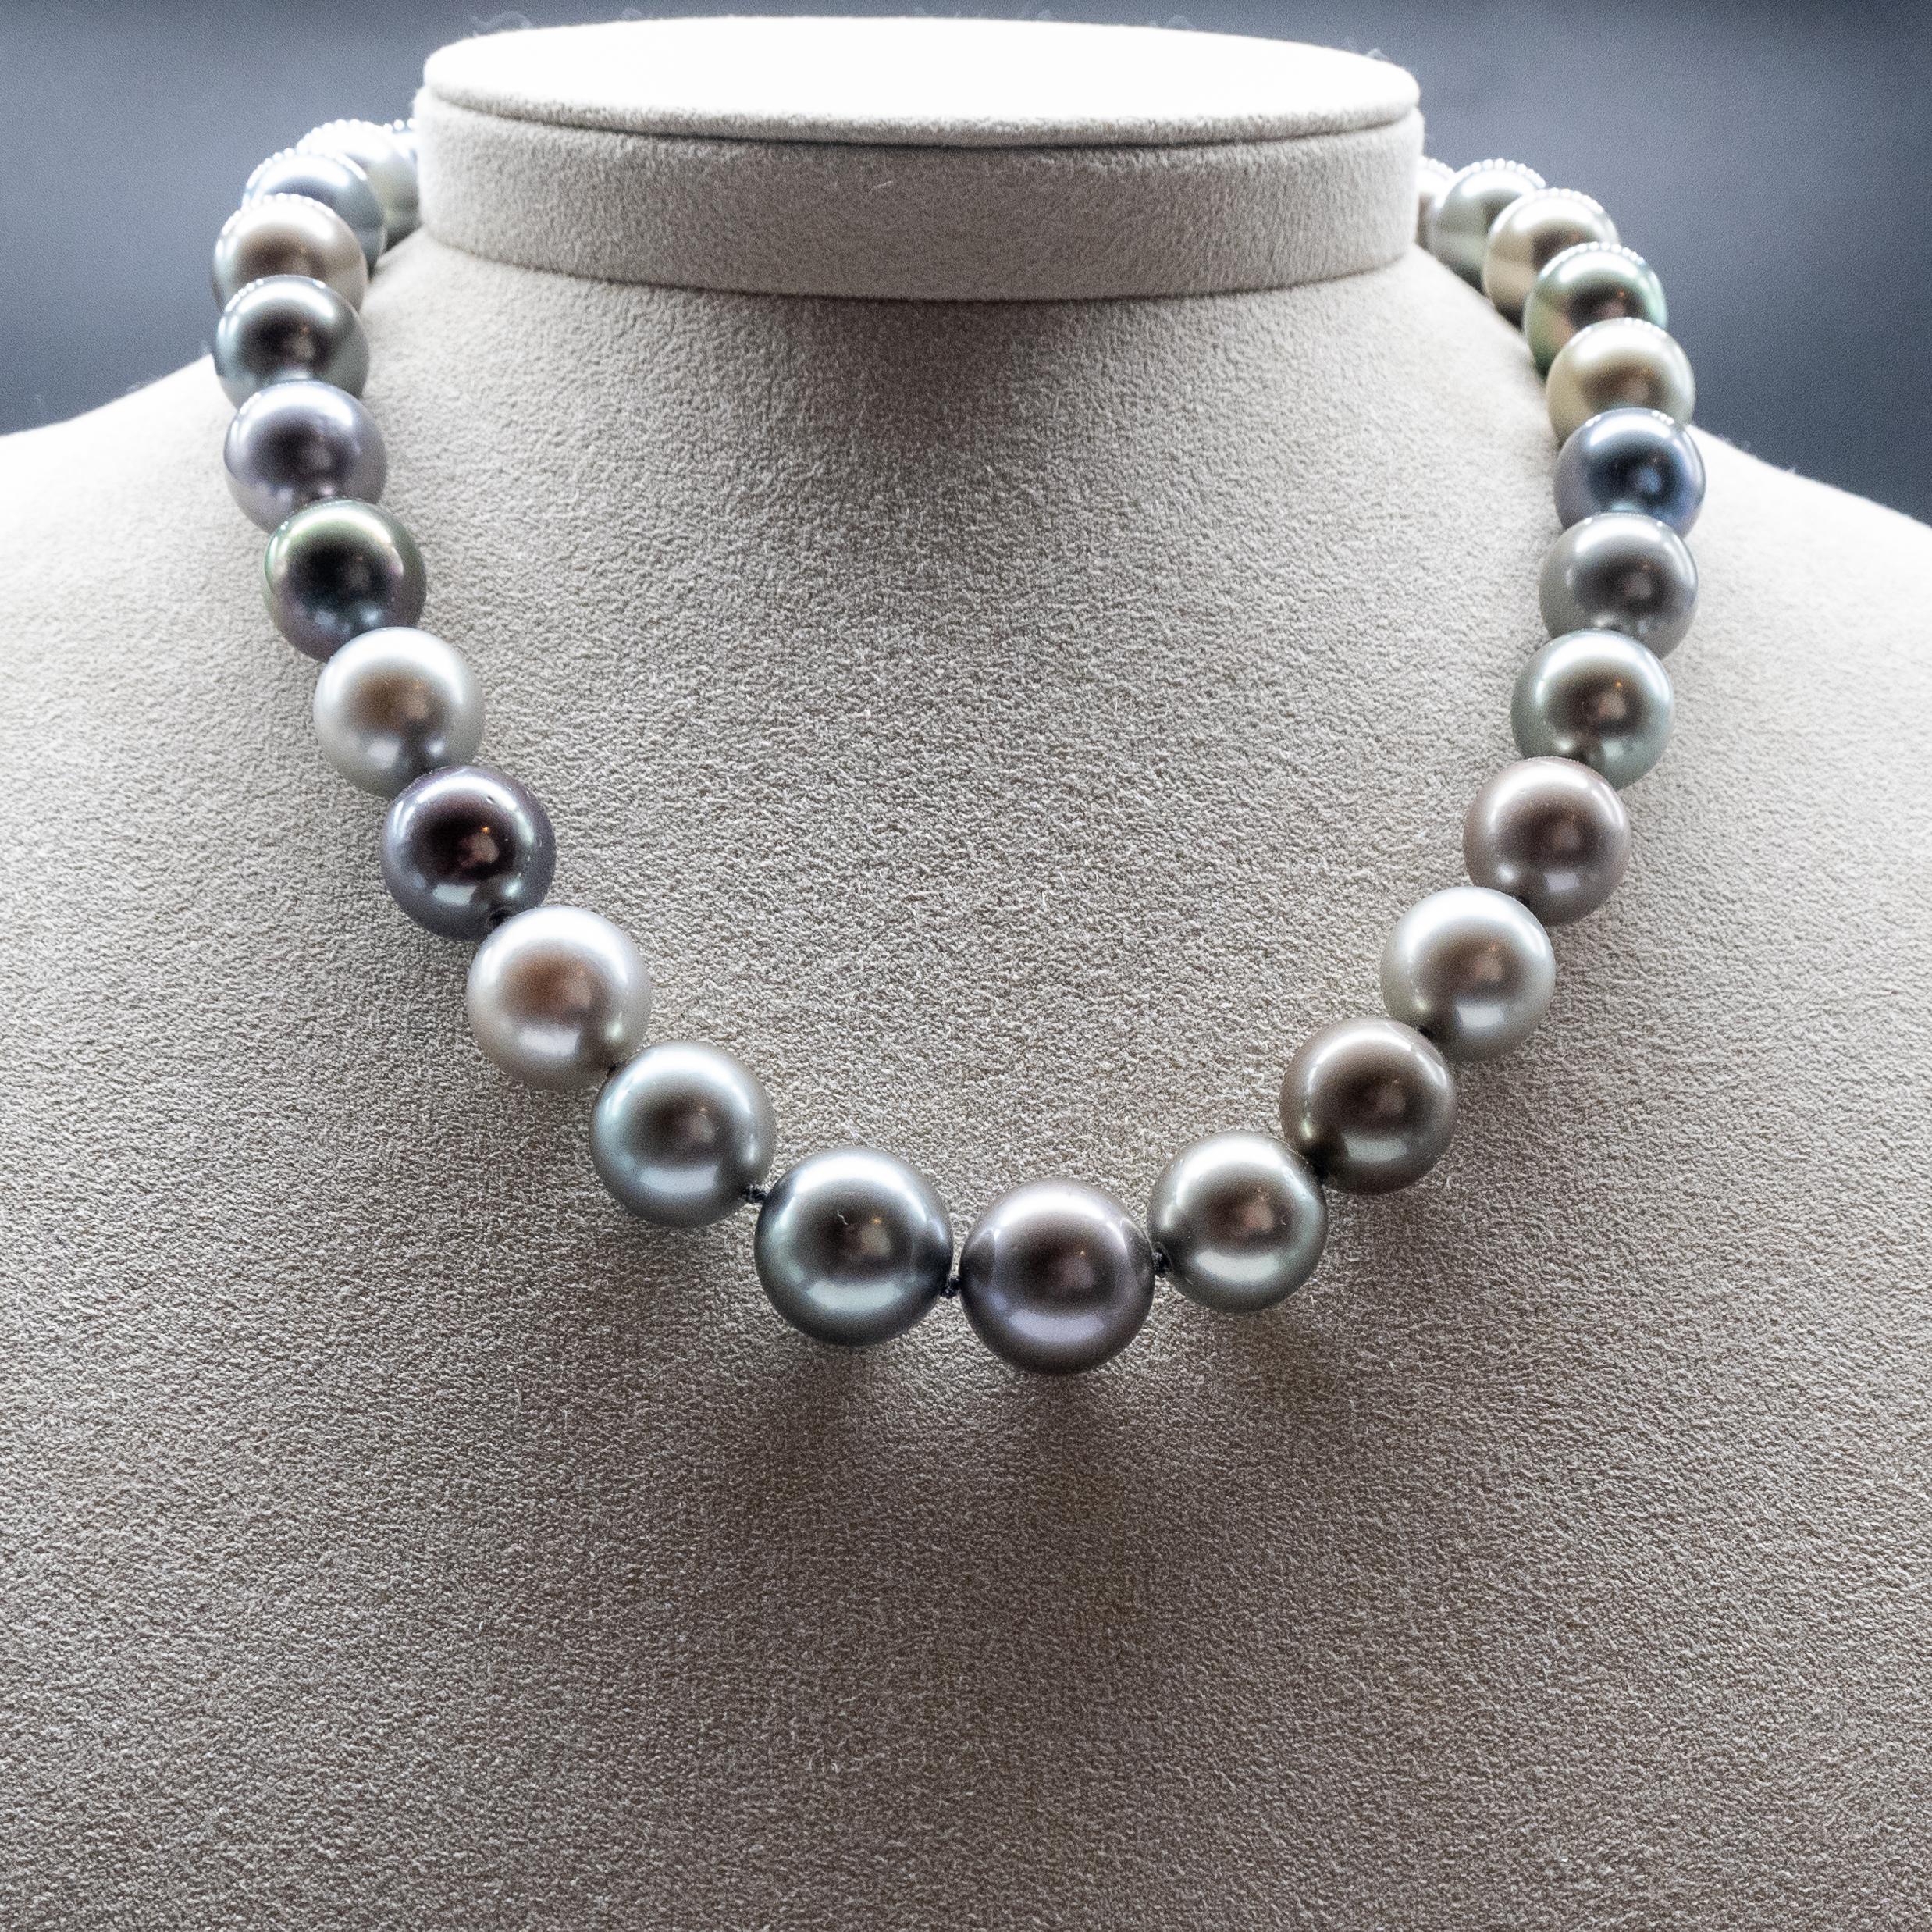 Women's Tahiti 14/12 Beaded Necklace, 31 AAA Pearls For Sale